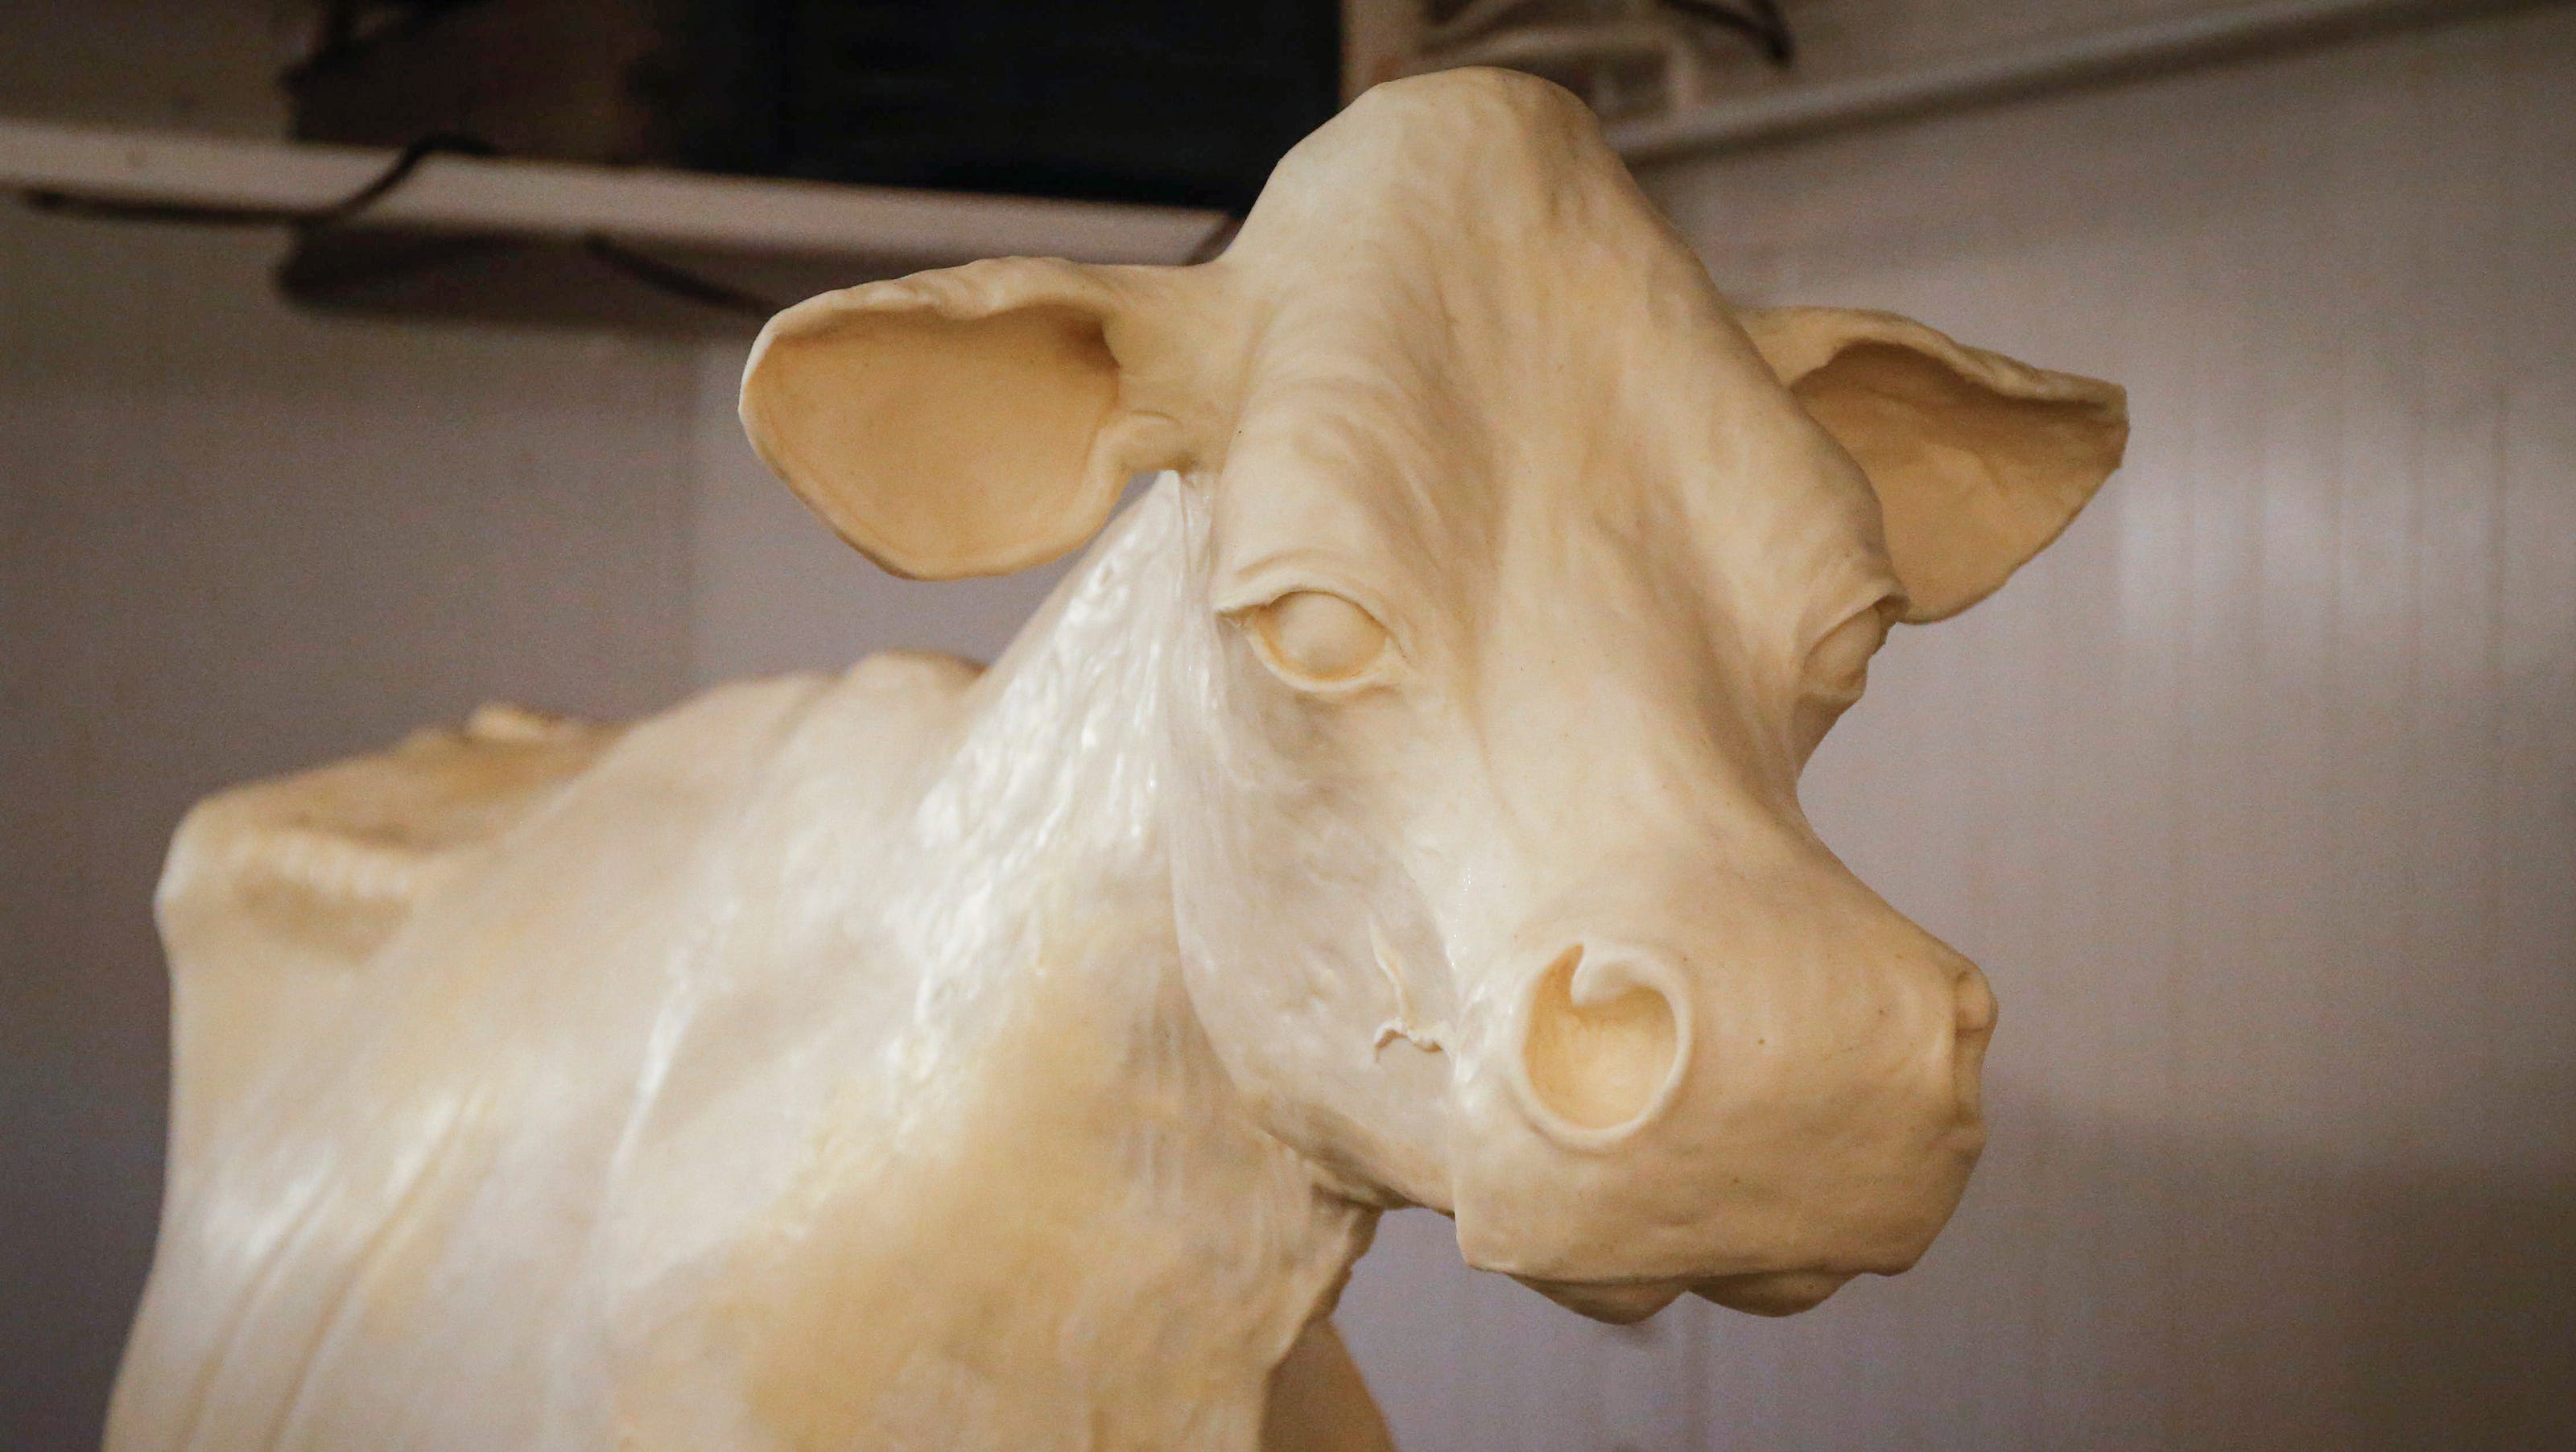 The Iowa State Fair's butter cow returns with the Giant Slide in 2021